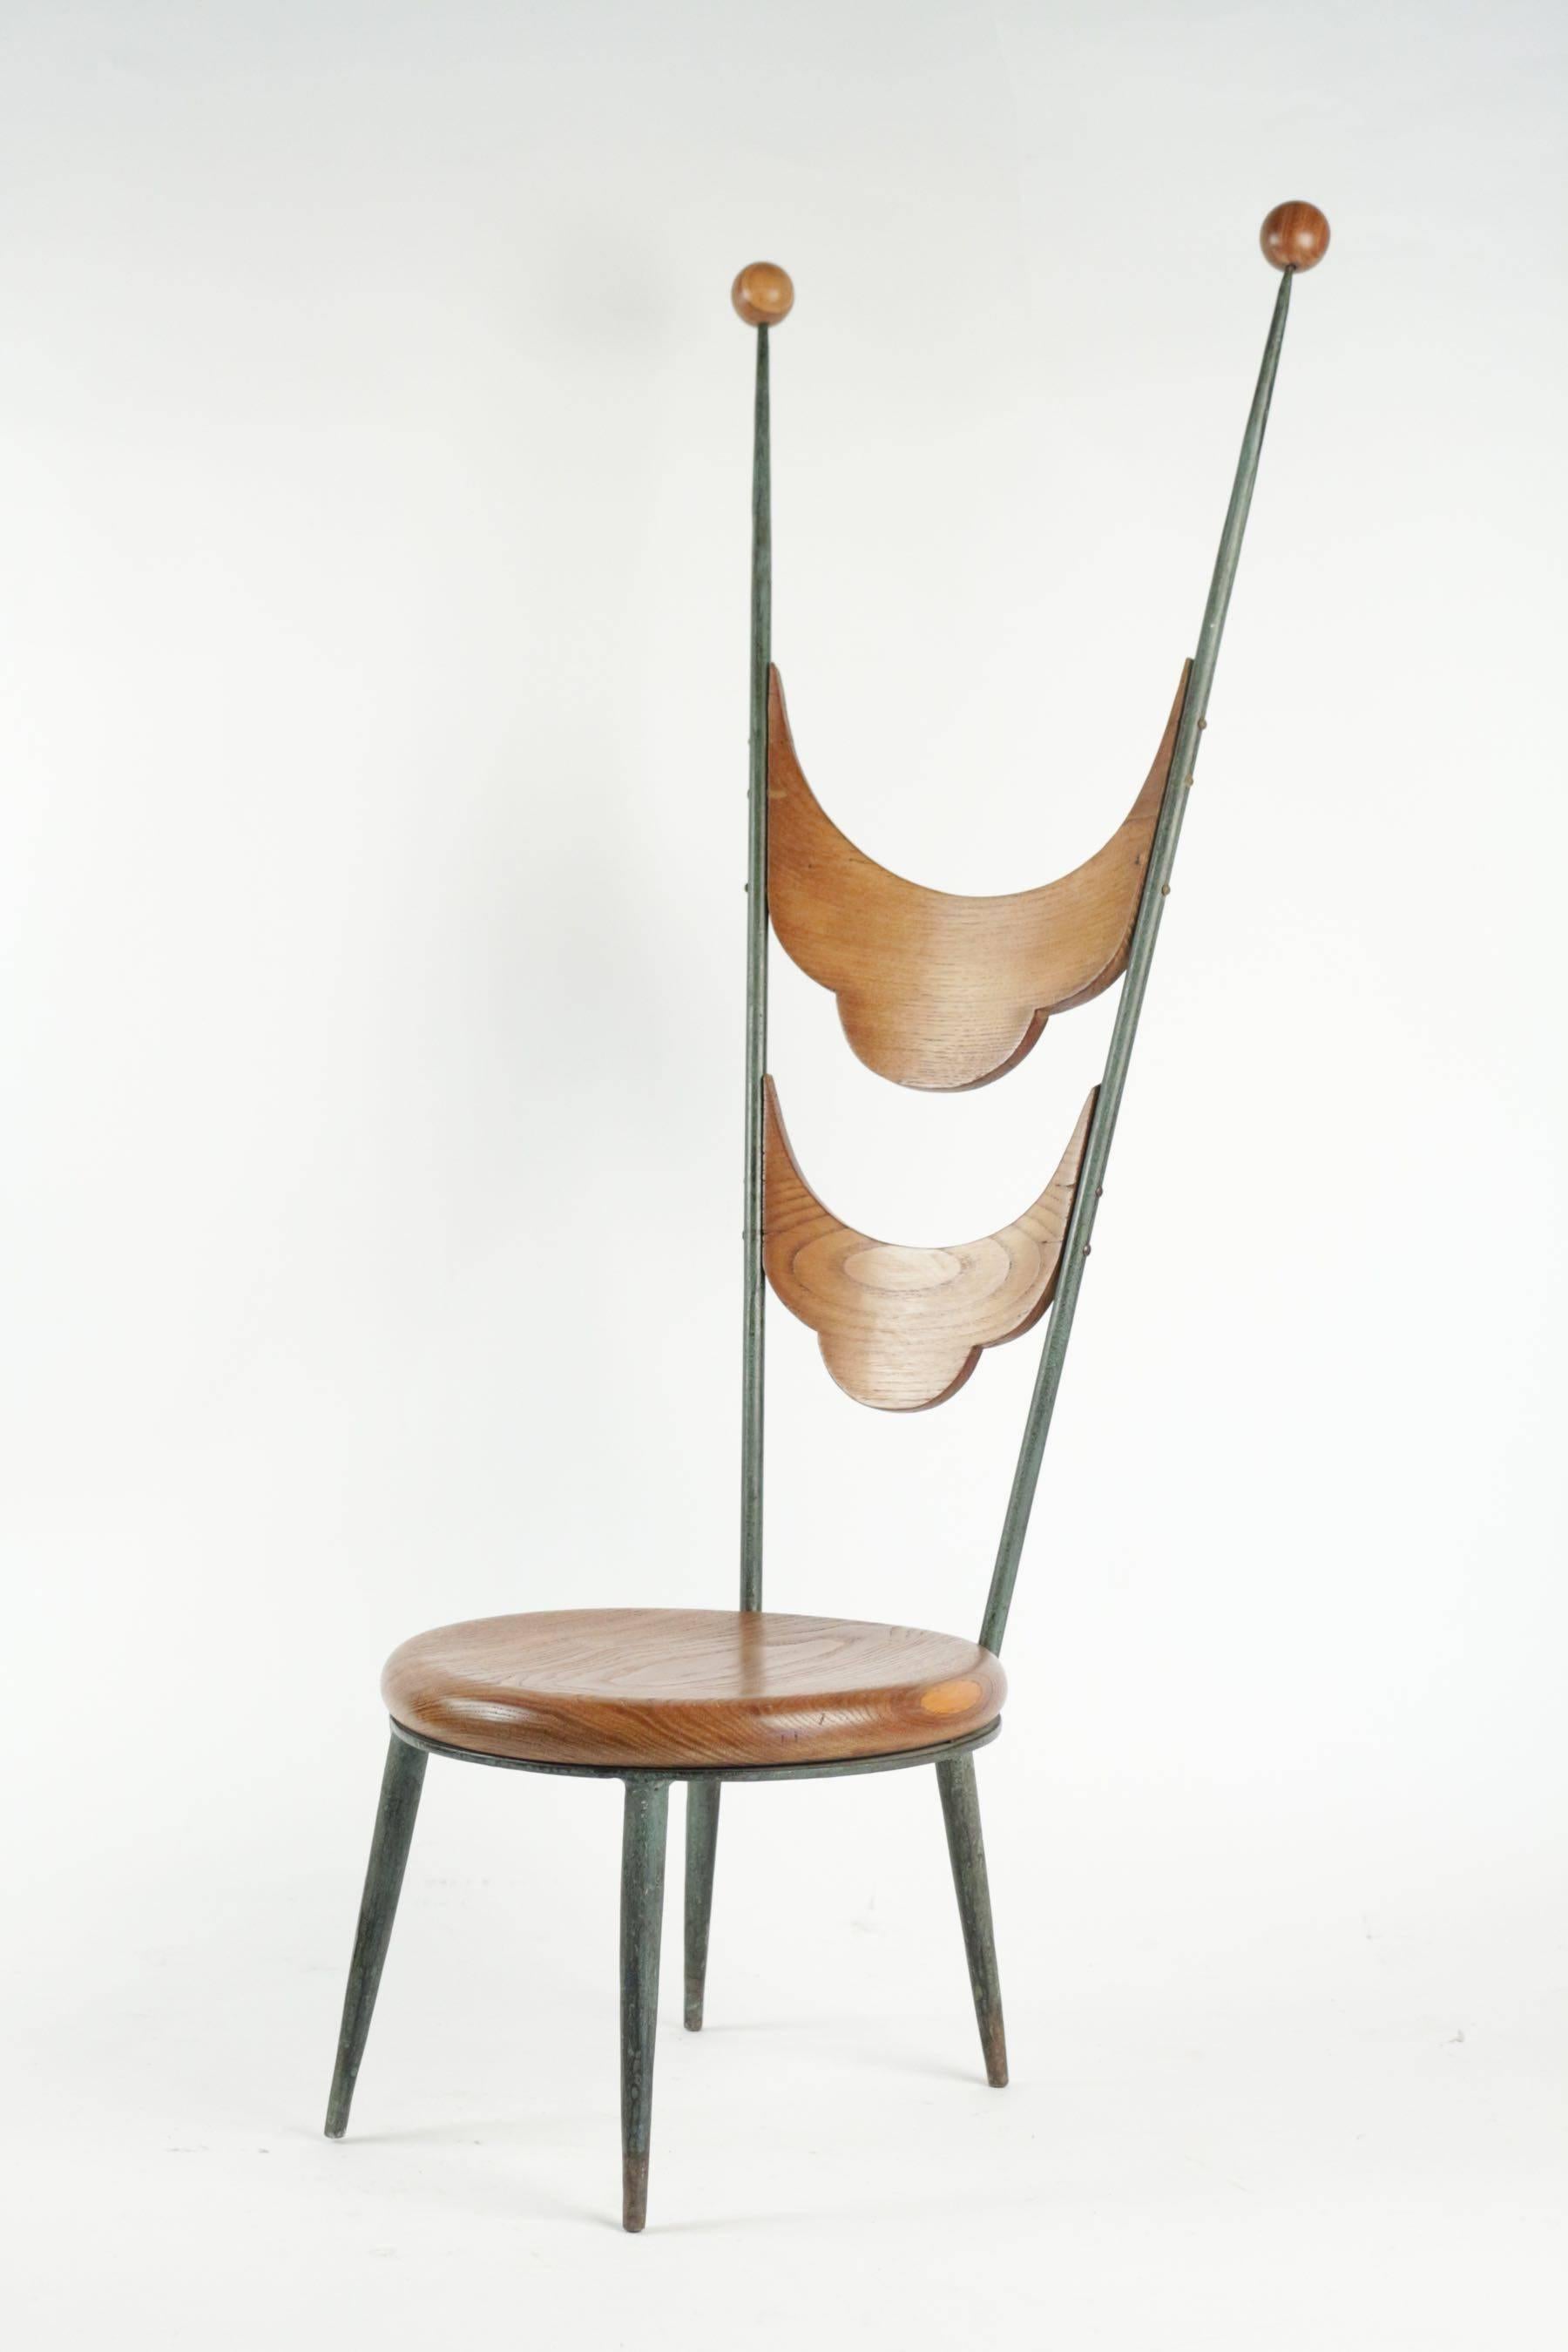 Italian 1920s Wood and Iron Low Chair by Sante Mingazzi